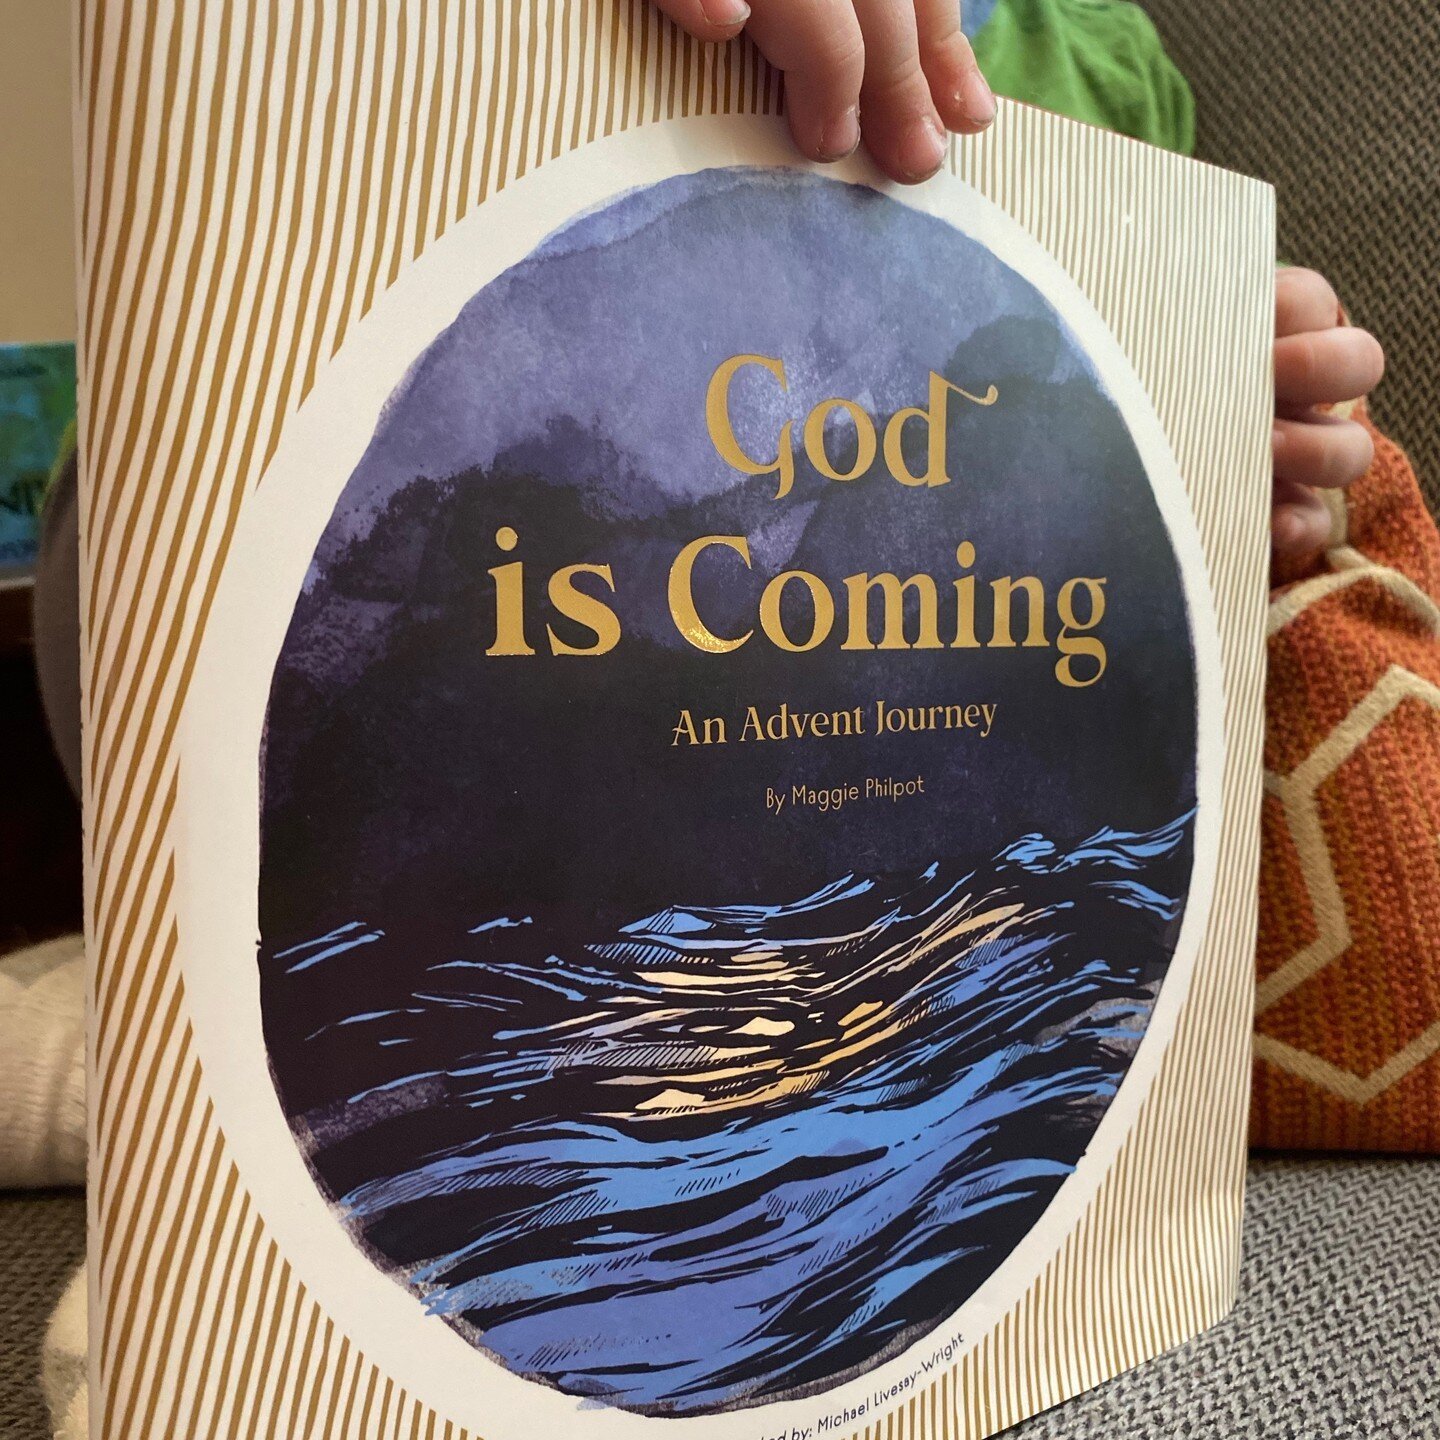 What makes God Is Coming different from other Advent books? There are great Advent books out there. But I was searching for something simple and yet expansive that captured the whimsy and majesty of the story of Christ's coming in a way children migh